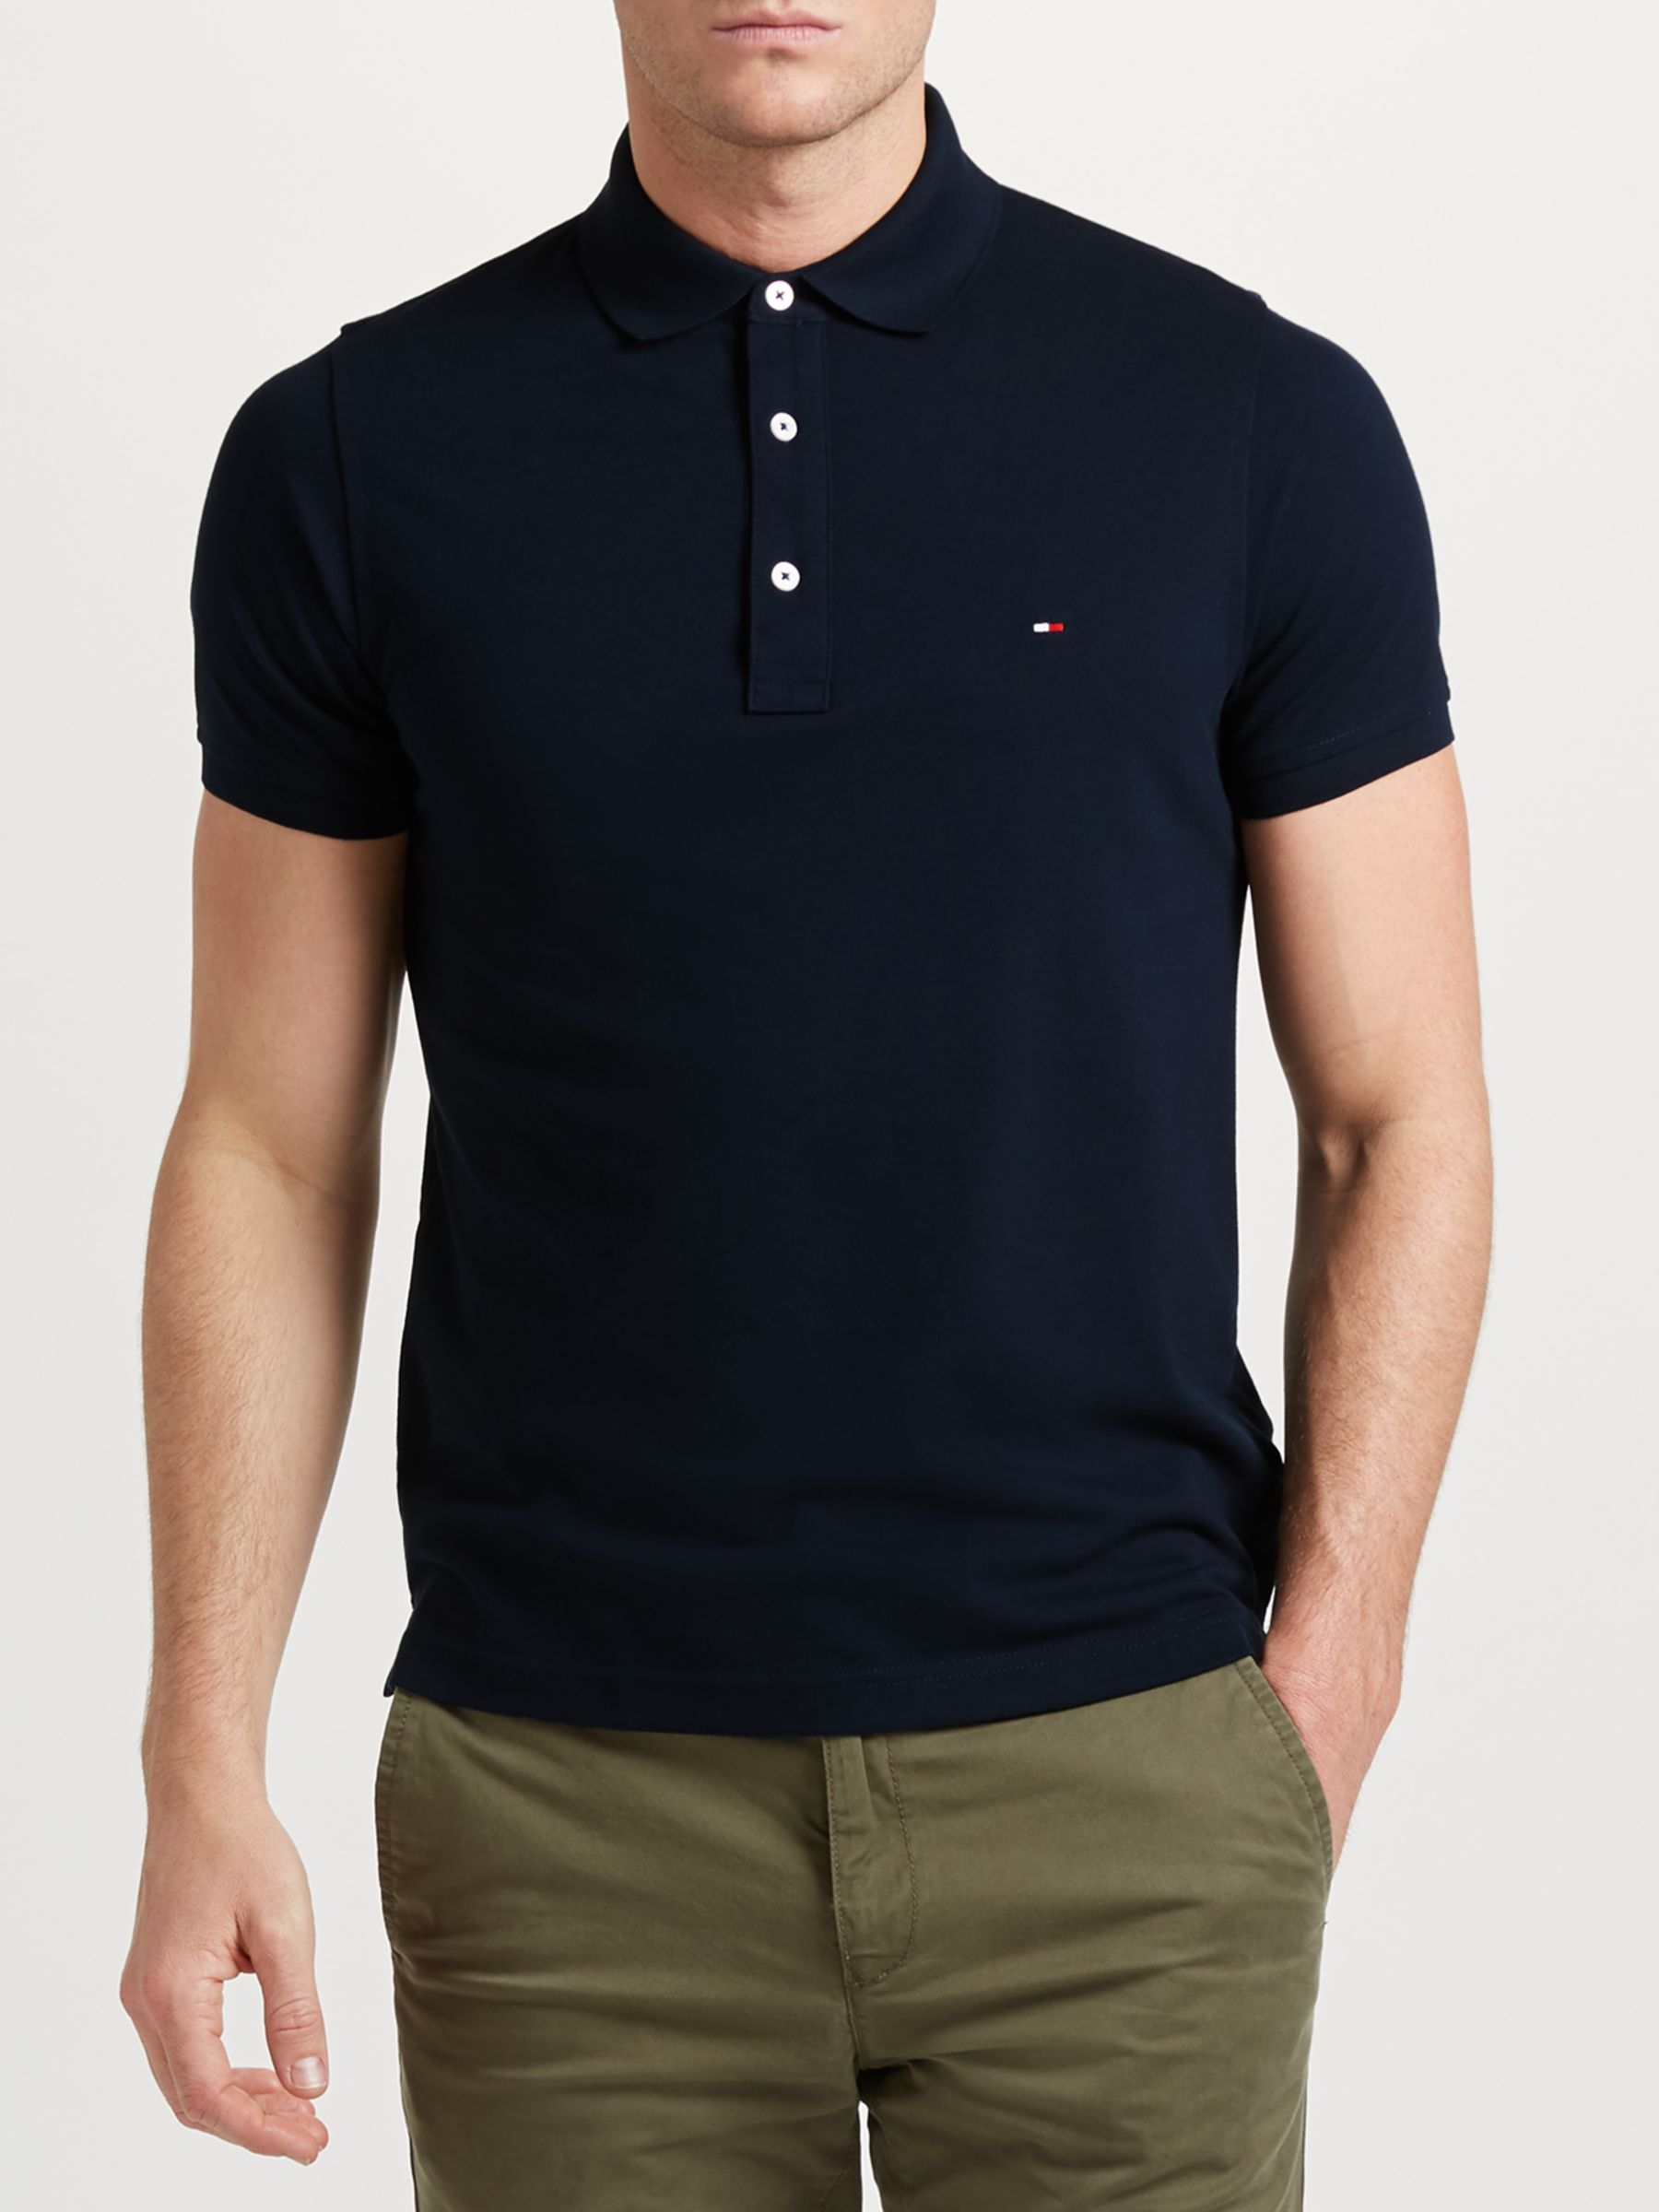 navy tommy hilfiger polo Cheaper Than 